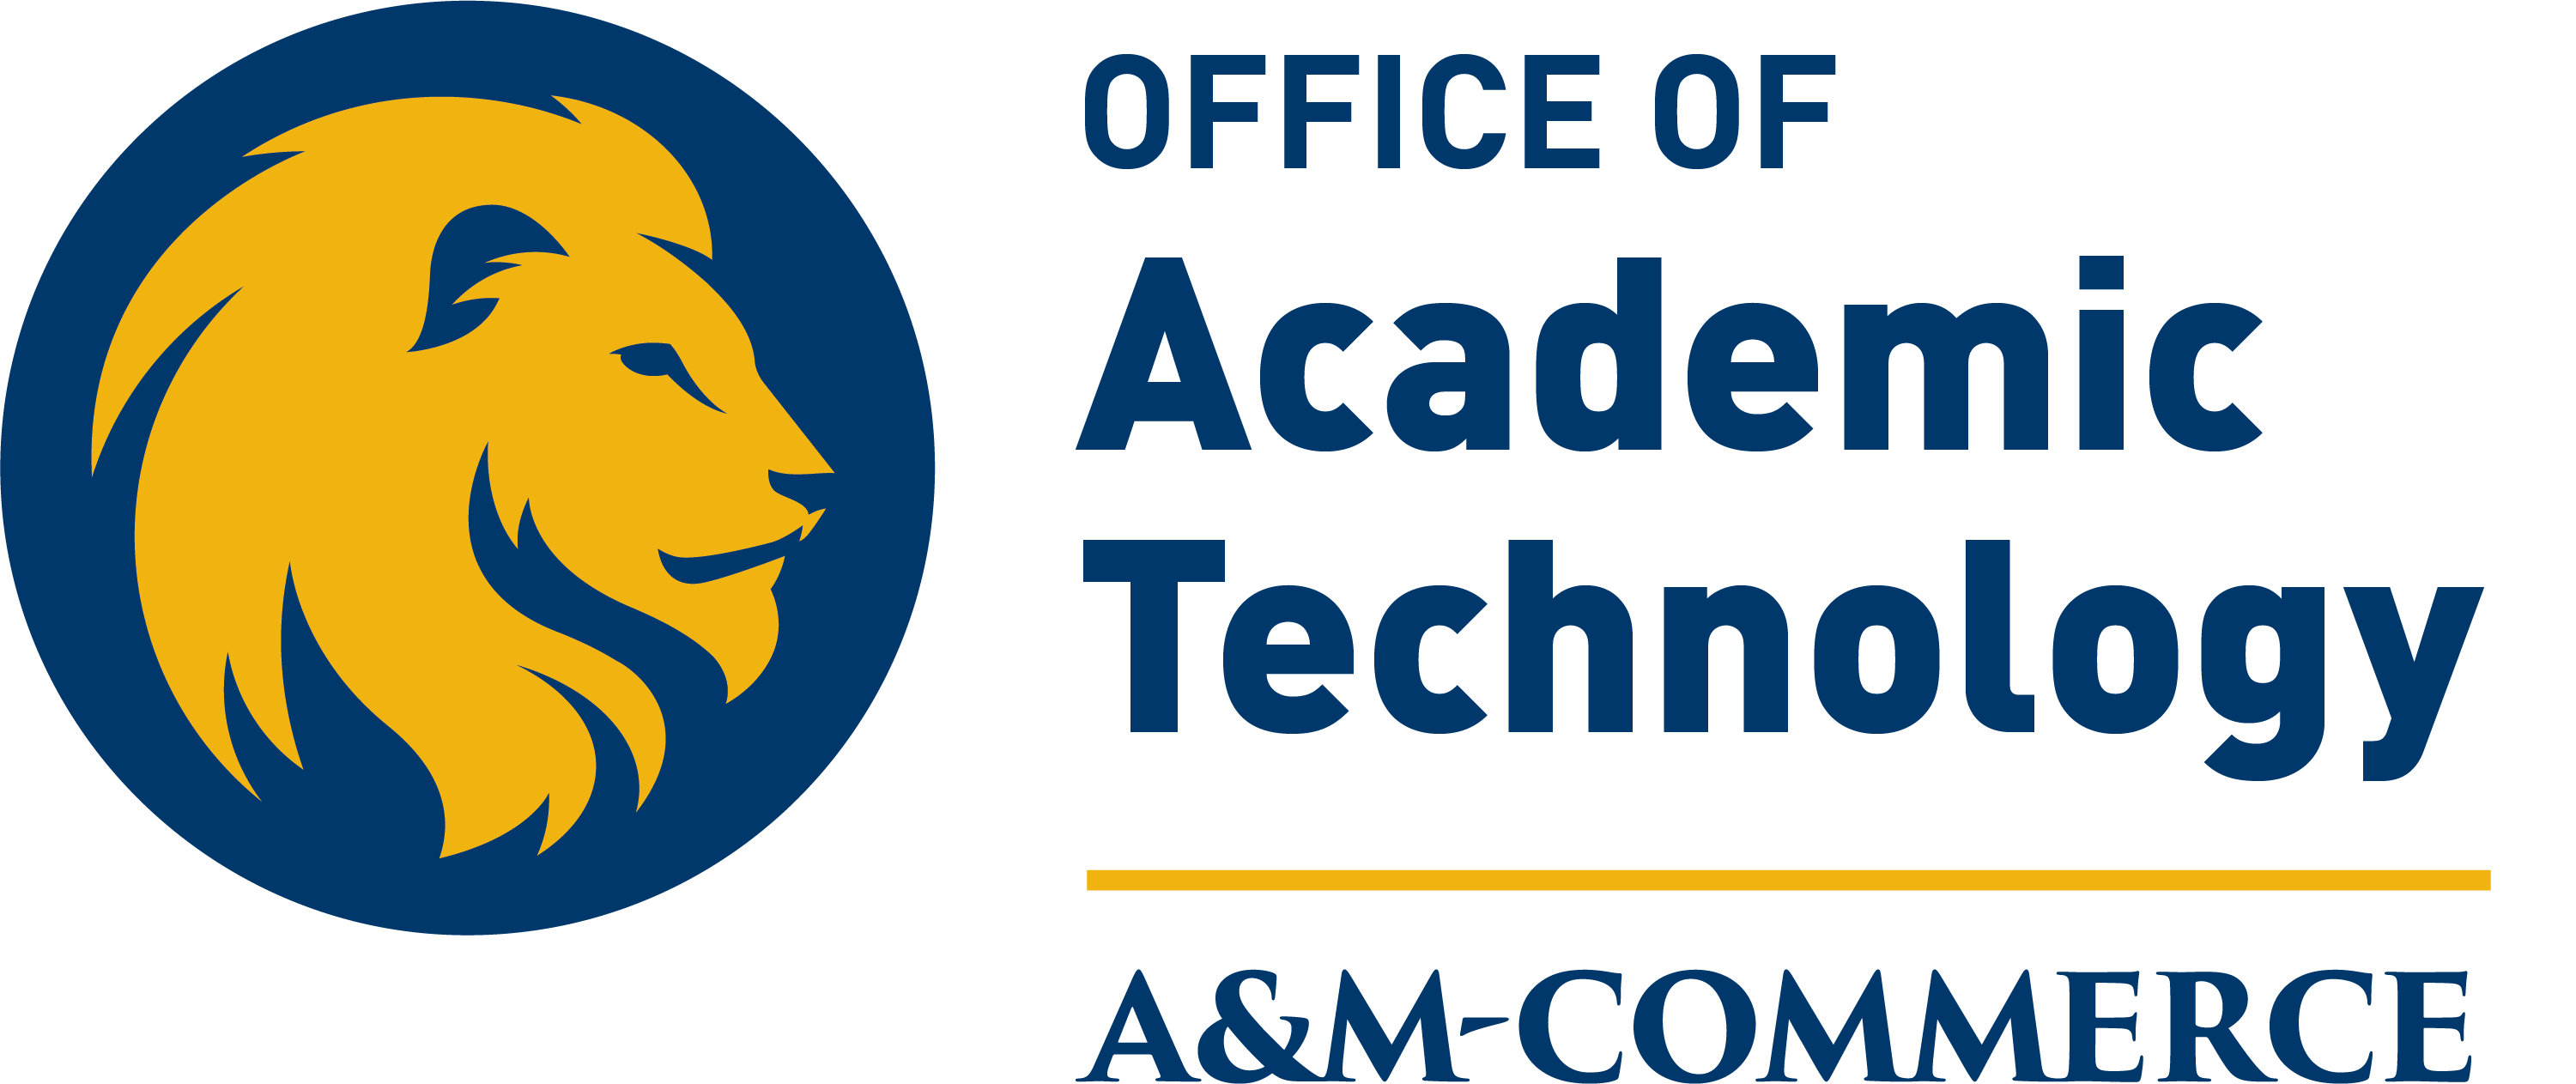 Office of Academic Technology